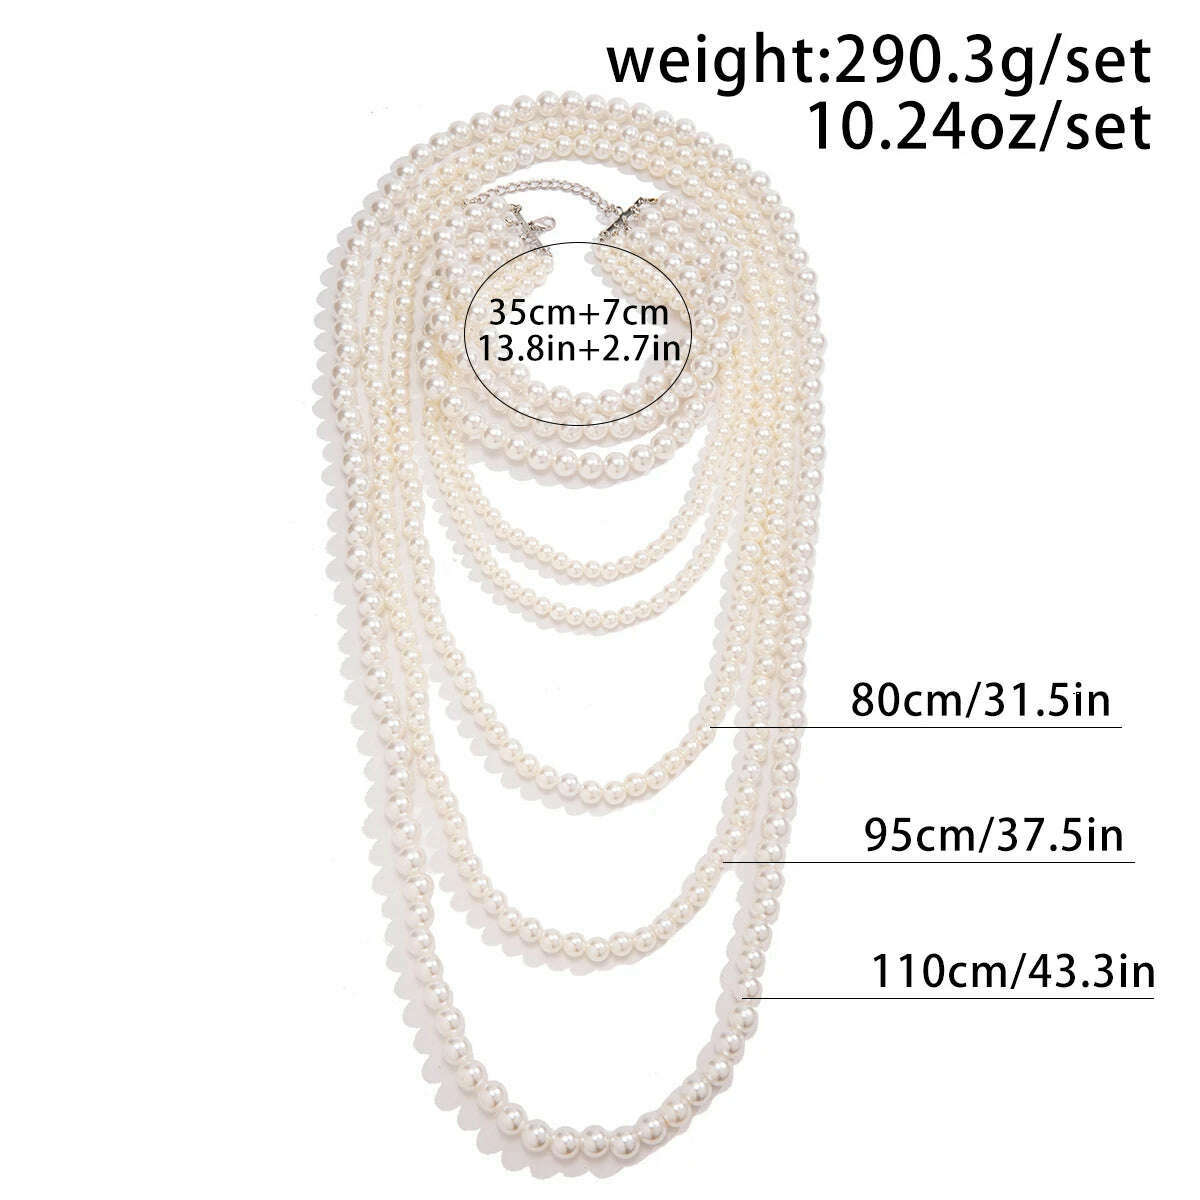 KIMLUD, Creative Multilayer Imitation Pearl Long Chain Necklace for Women Elegant Tassel Beads Choker Party Y2K Jewelry Wed Accessories, KIMLUD Womens Clothes